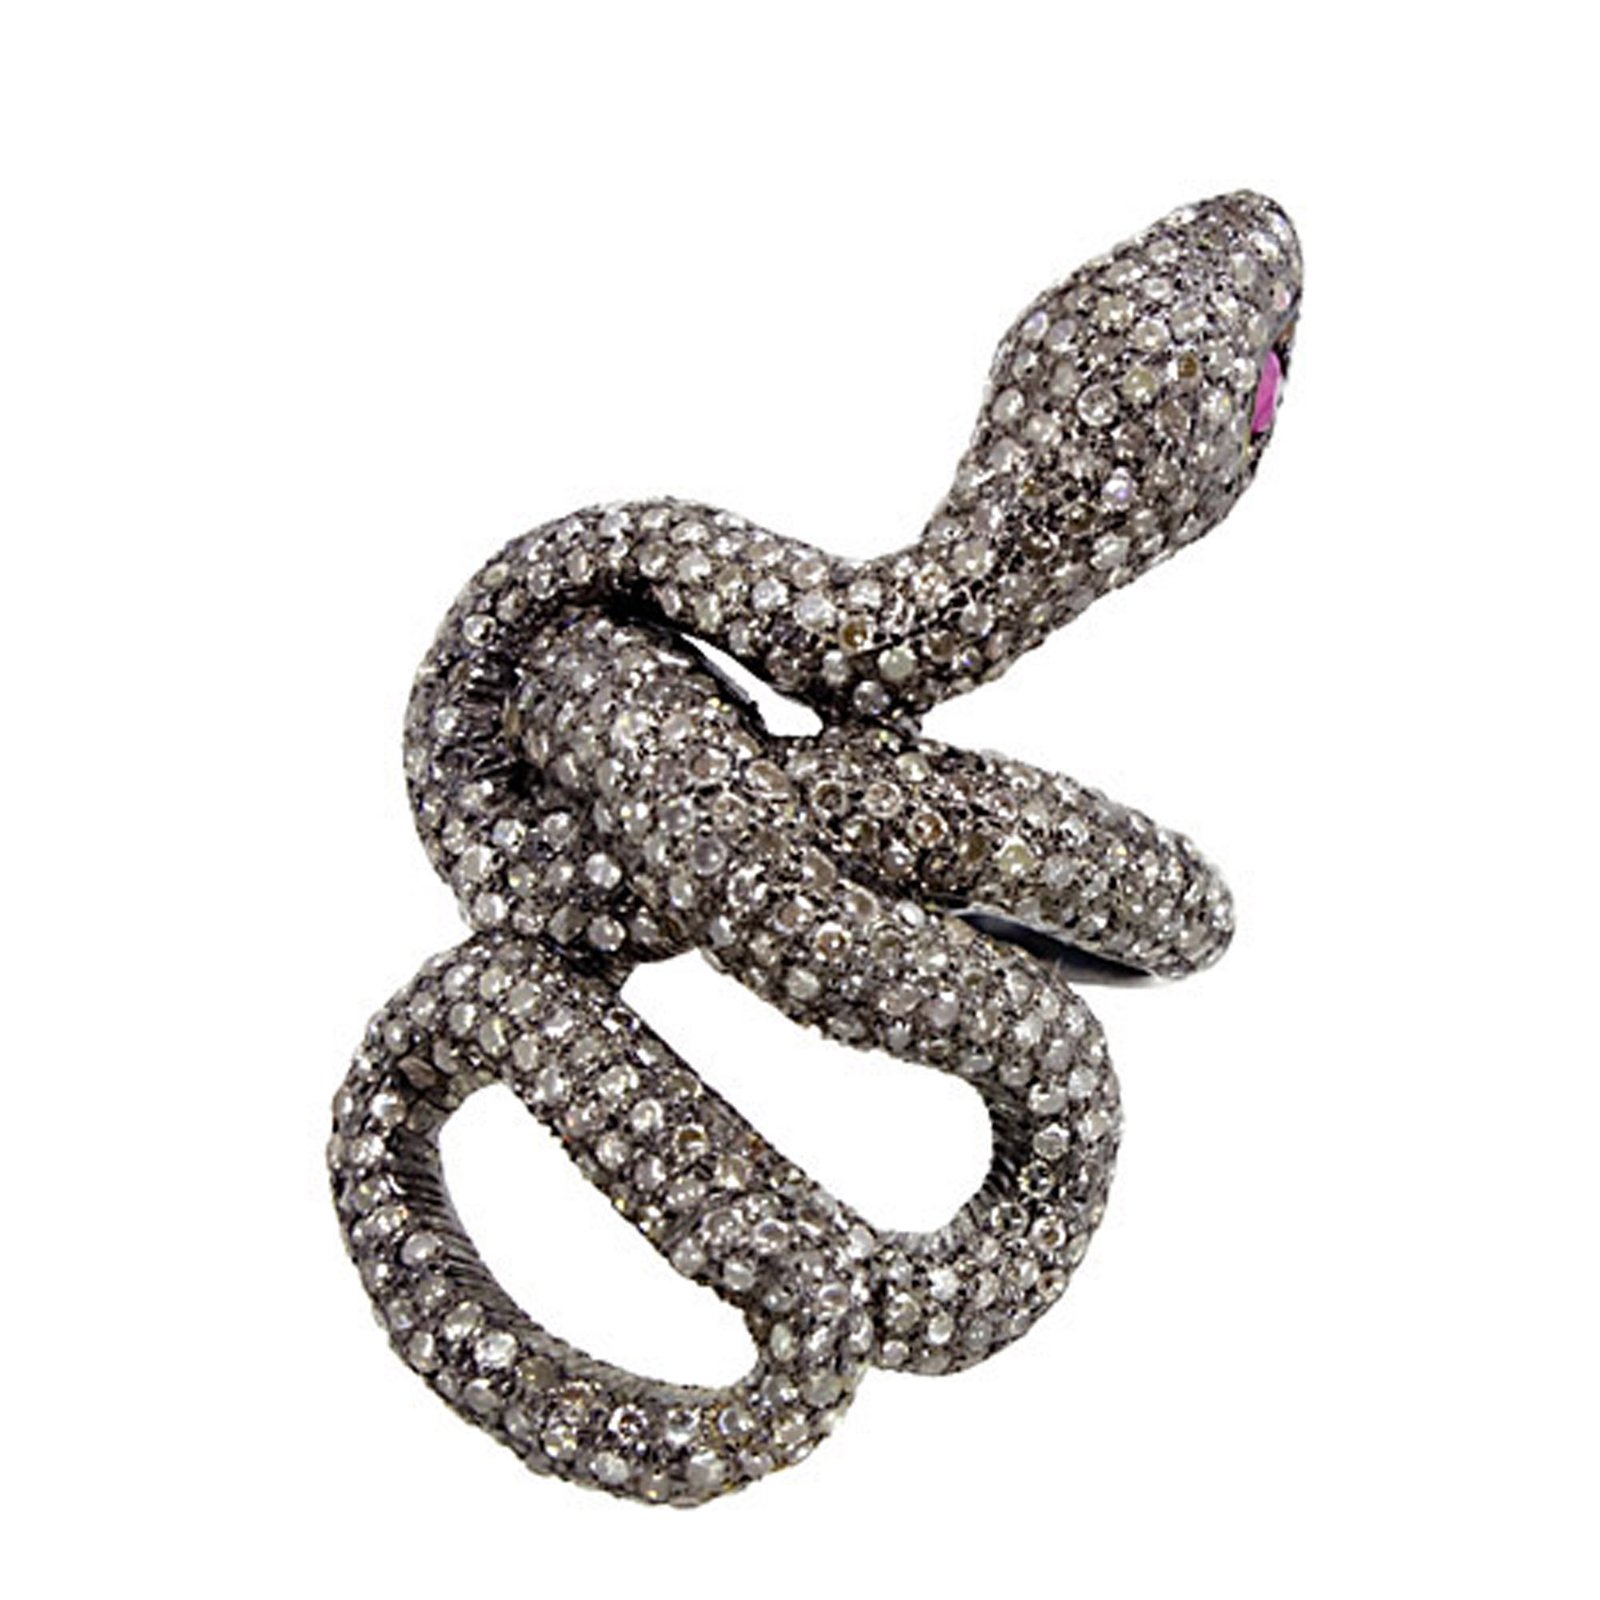 Snake ring vintage jewelry set in 925 silver